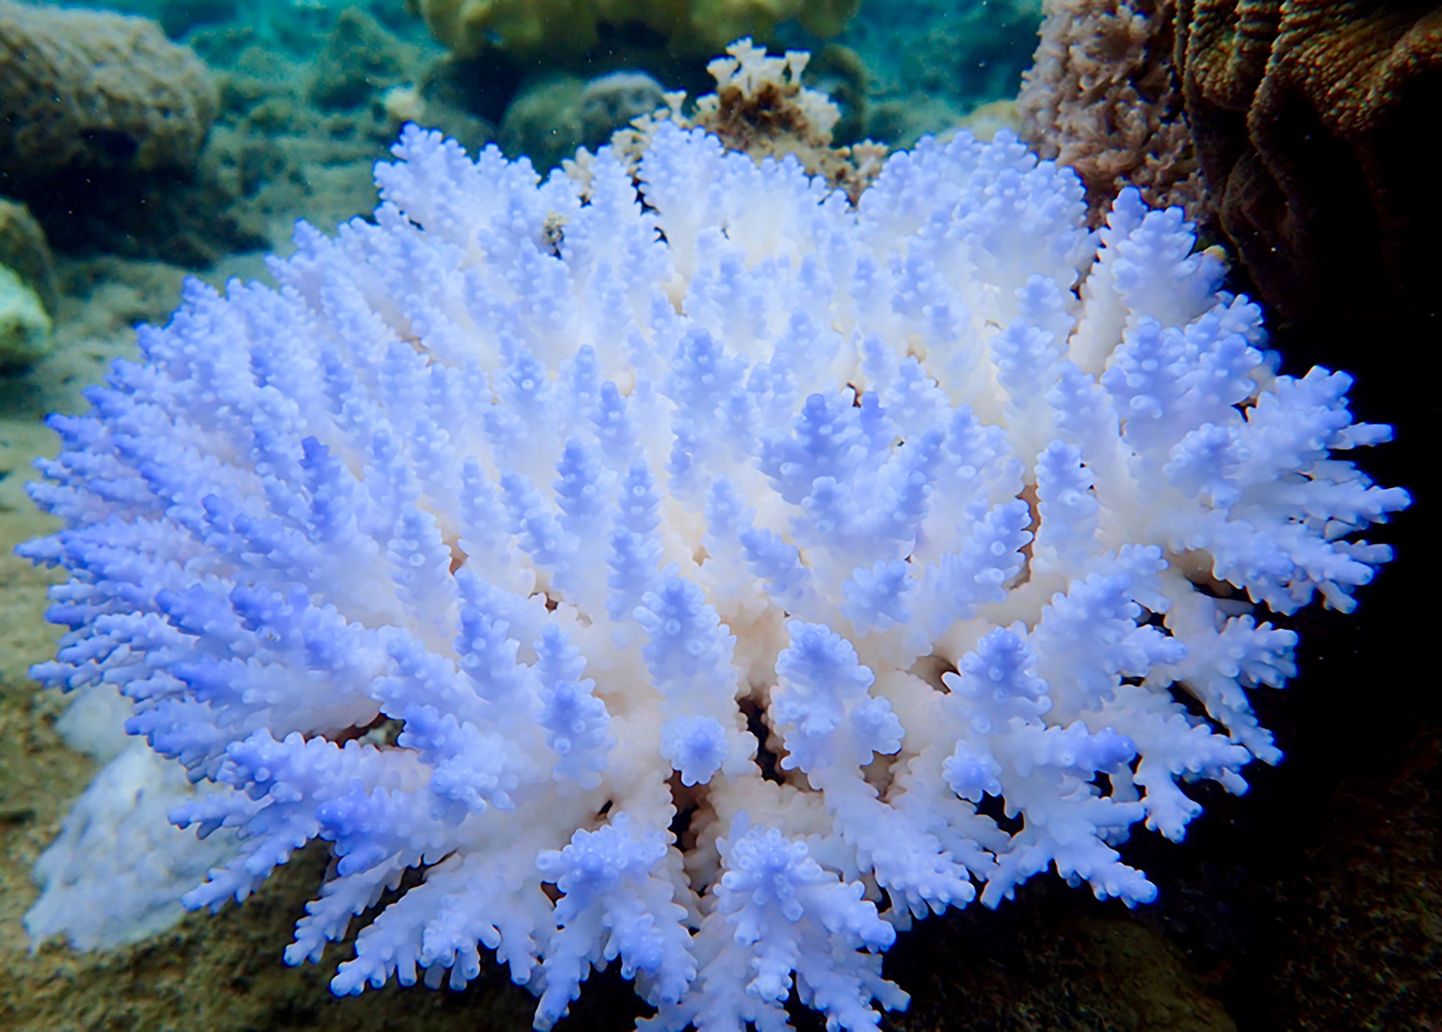 An undated handout photo received from ARC Centre of Excellence for Coral Reef Studies on April 19, 2018 shows a mass bleaching event of coral on Australia's Great Barrier Reef. 
The Great Barrier Reef suffered a "catastrophic die-off" of coral during an extended heatwave in 2016, threatening a broader range of reef life than previously feared, a report revealed on April 19, 2018. / AFP PHOTO / ARC Centre of Excellence for Cor / GREG TORDA